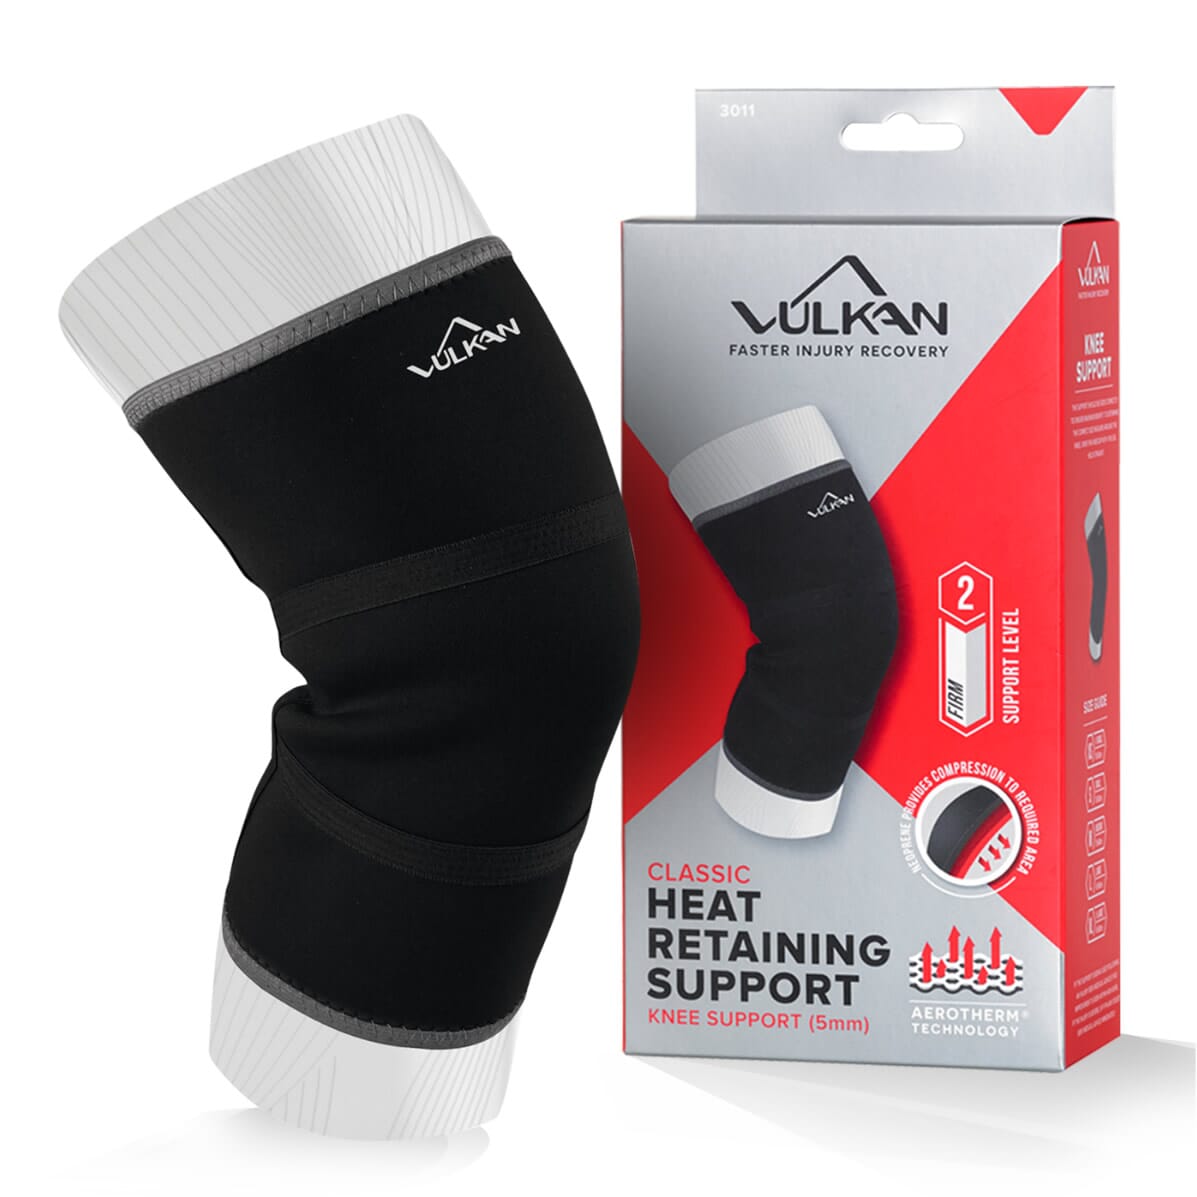 View Knee Support Vulkan Large 5mm thick information